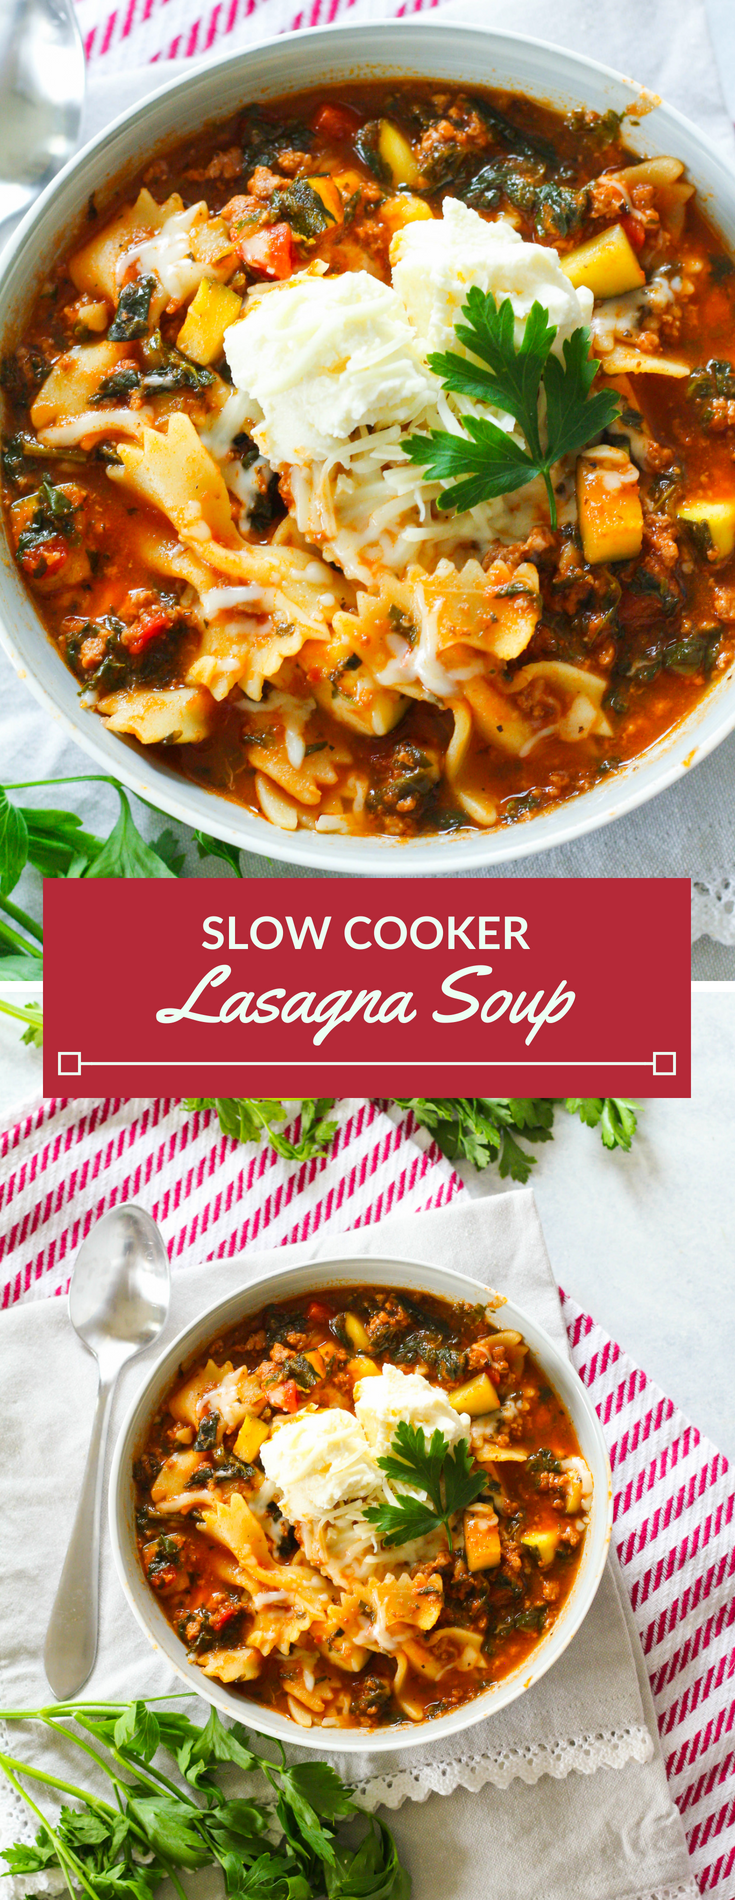 What's better than baked lasagna? Lasagna in a bowl! This Slow Cooker Lasagna Soup is packed with tender ground beef, crushed tomatoes, zucchini, spinach and bow tie pasta. Topped with a dollop of ricotta and sprinkle of mozzarella -- you've got yourself a delicious, cheesy weeknight meal!What's better than baked lasagna? Lasagna in a bowl! This Slow Cooker Lasagna Soup is packed with tender ground beef, crushed tomatoes, zucchini, spinach and bow tie pasta. Topped with a dollop of ricotta and sprinkle of mozzarella -- you've got yourself a delicious, cheesy weeknight meal!